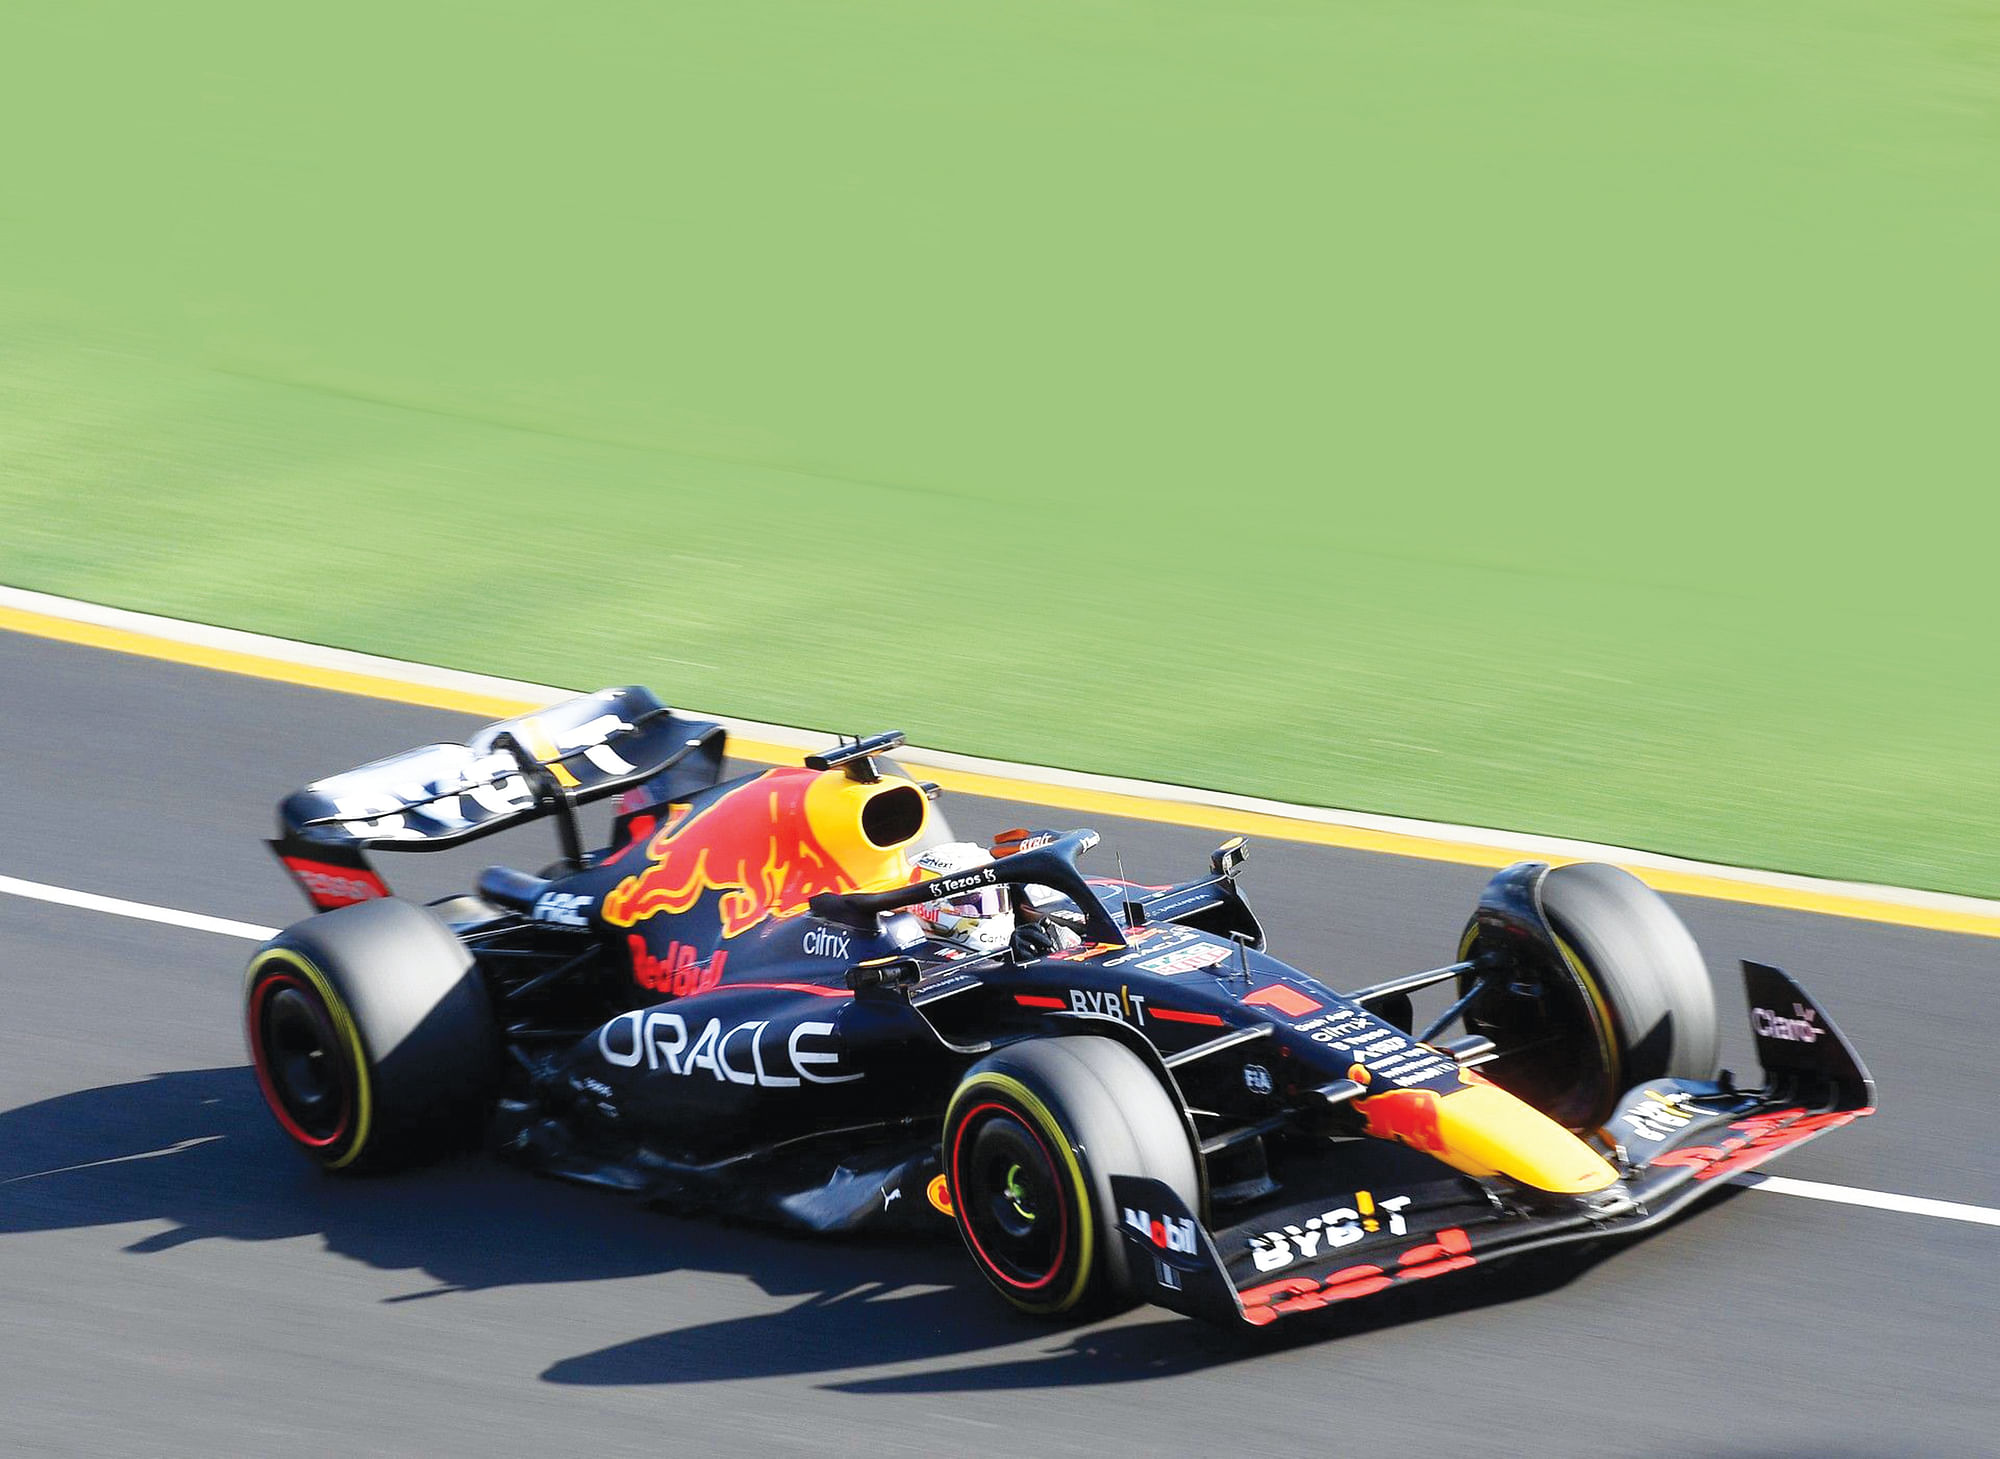 Sui Blockchain Creator Inks Deal With F1's Red Bull Racing Team - Blockworks